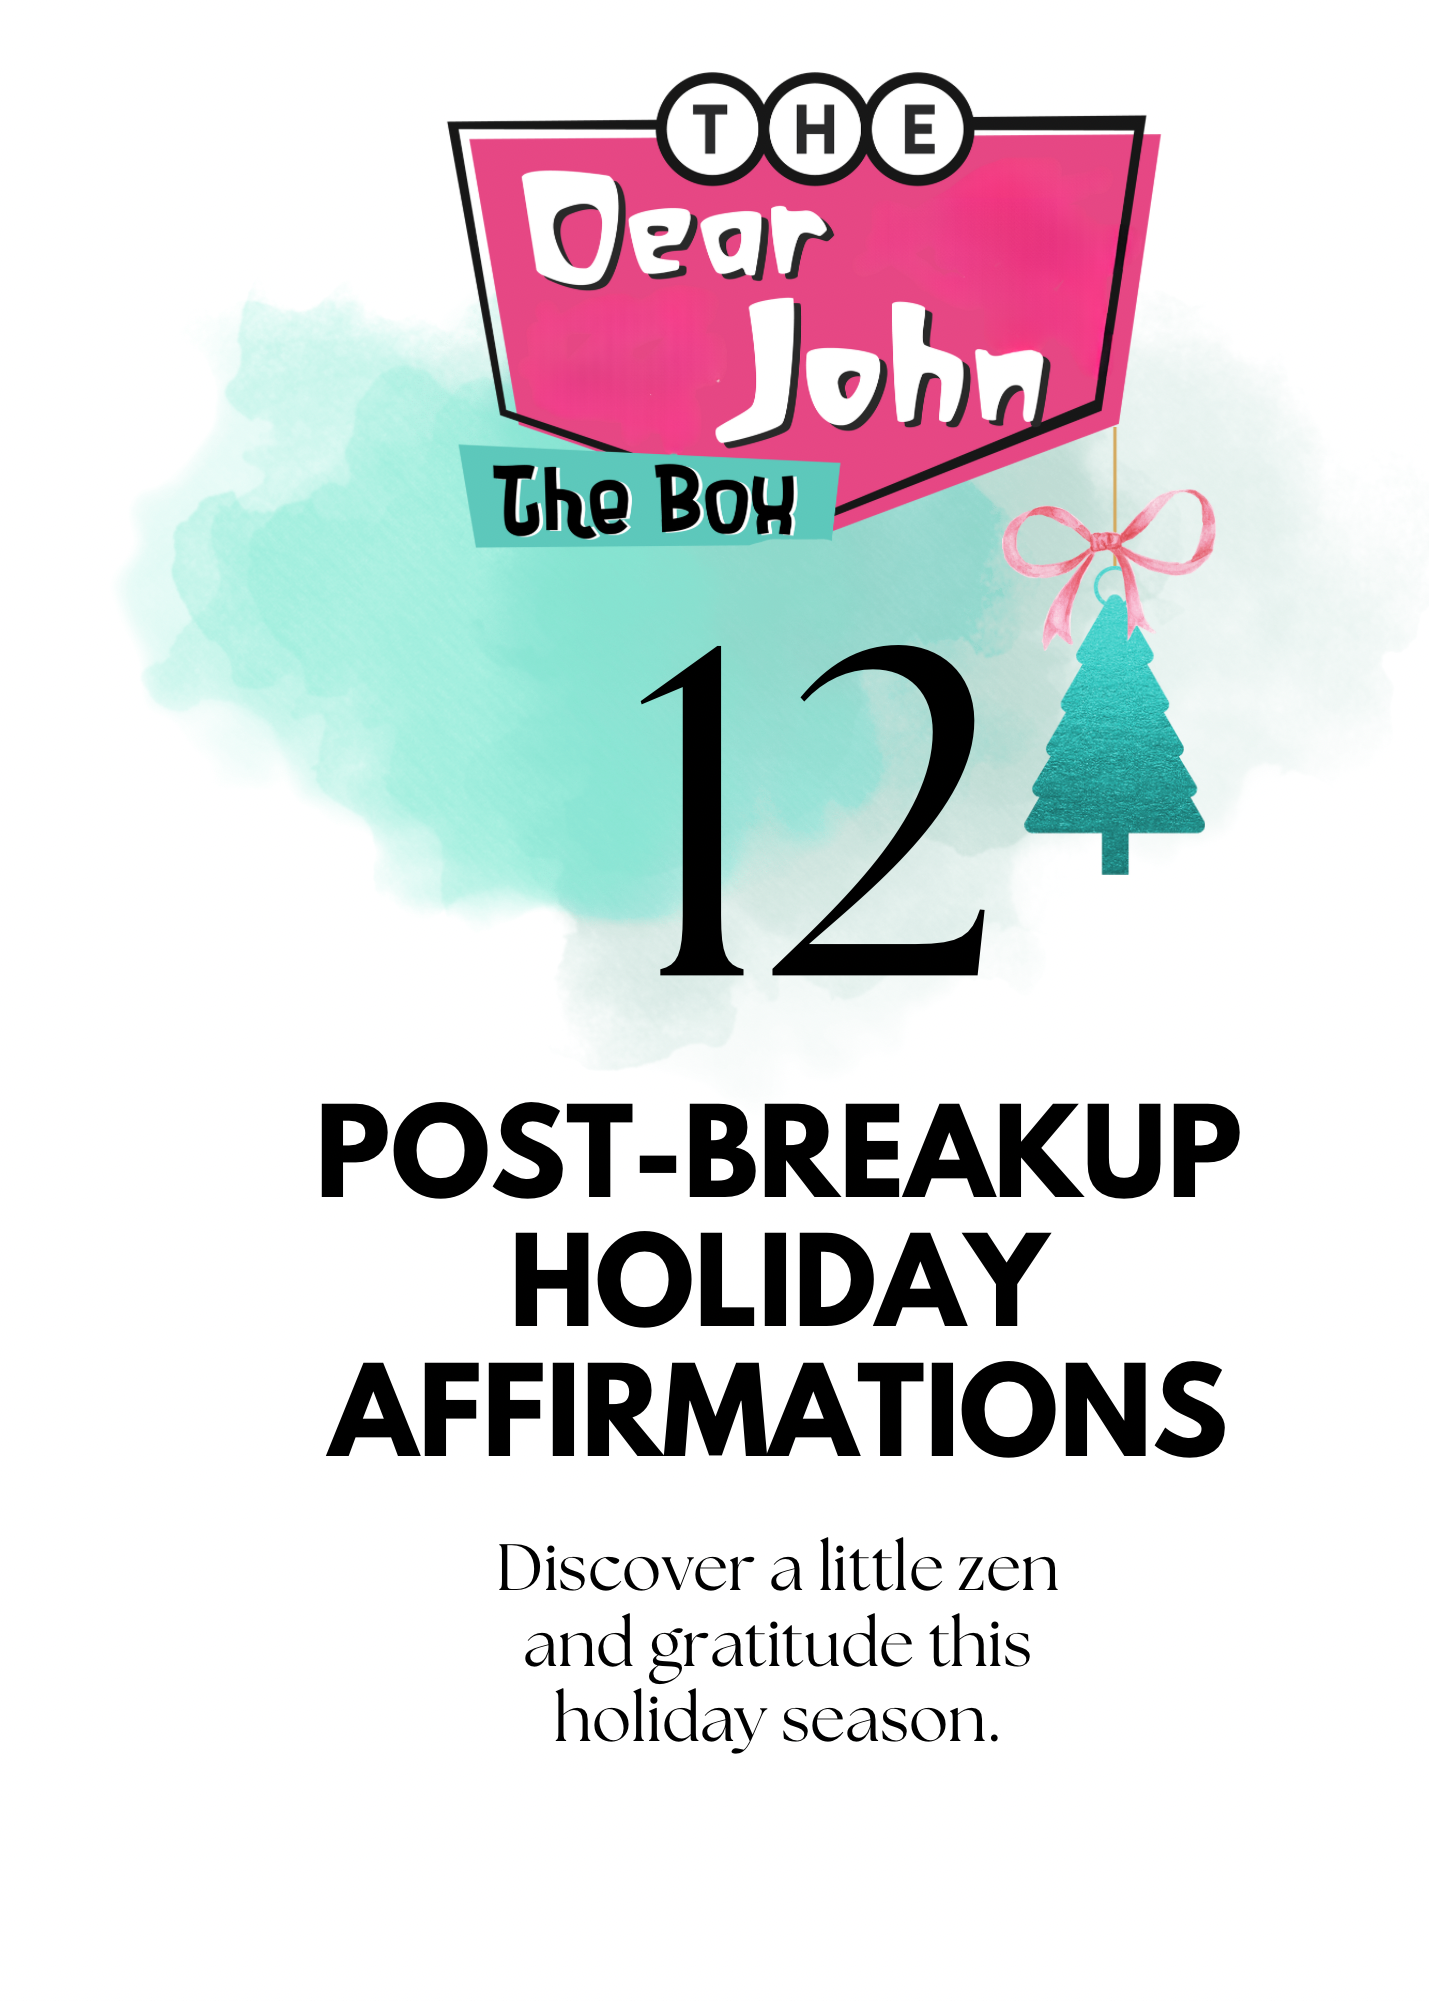 FREE Post-Breakup Holiday Affirmations